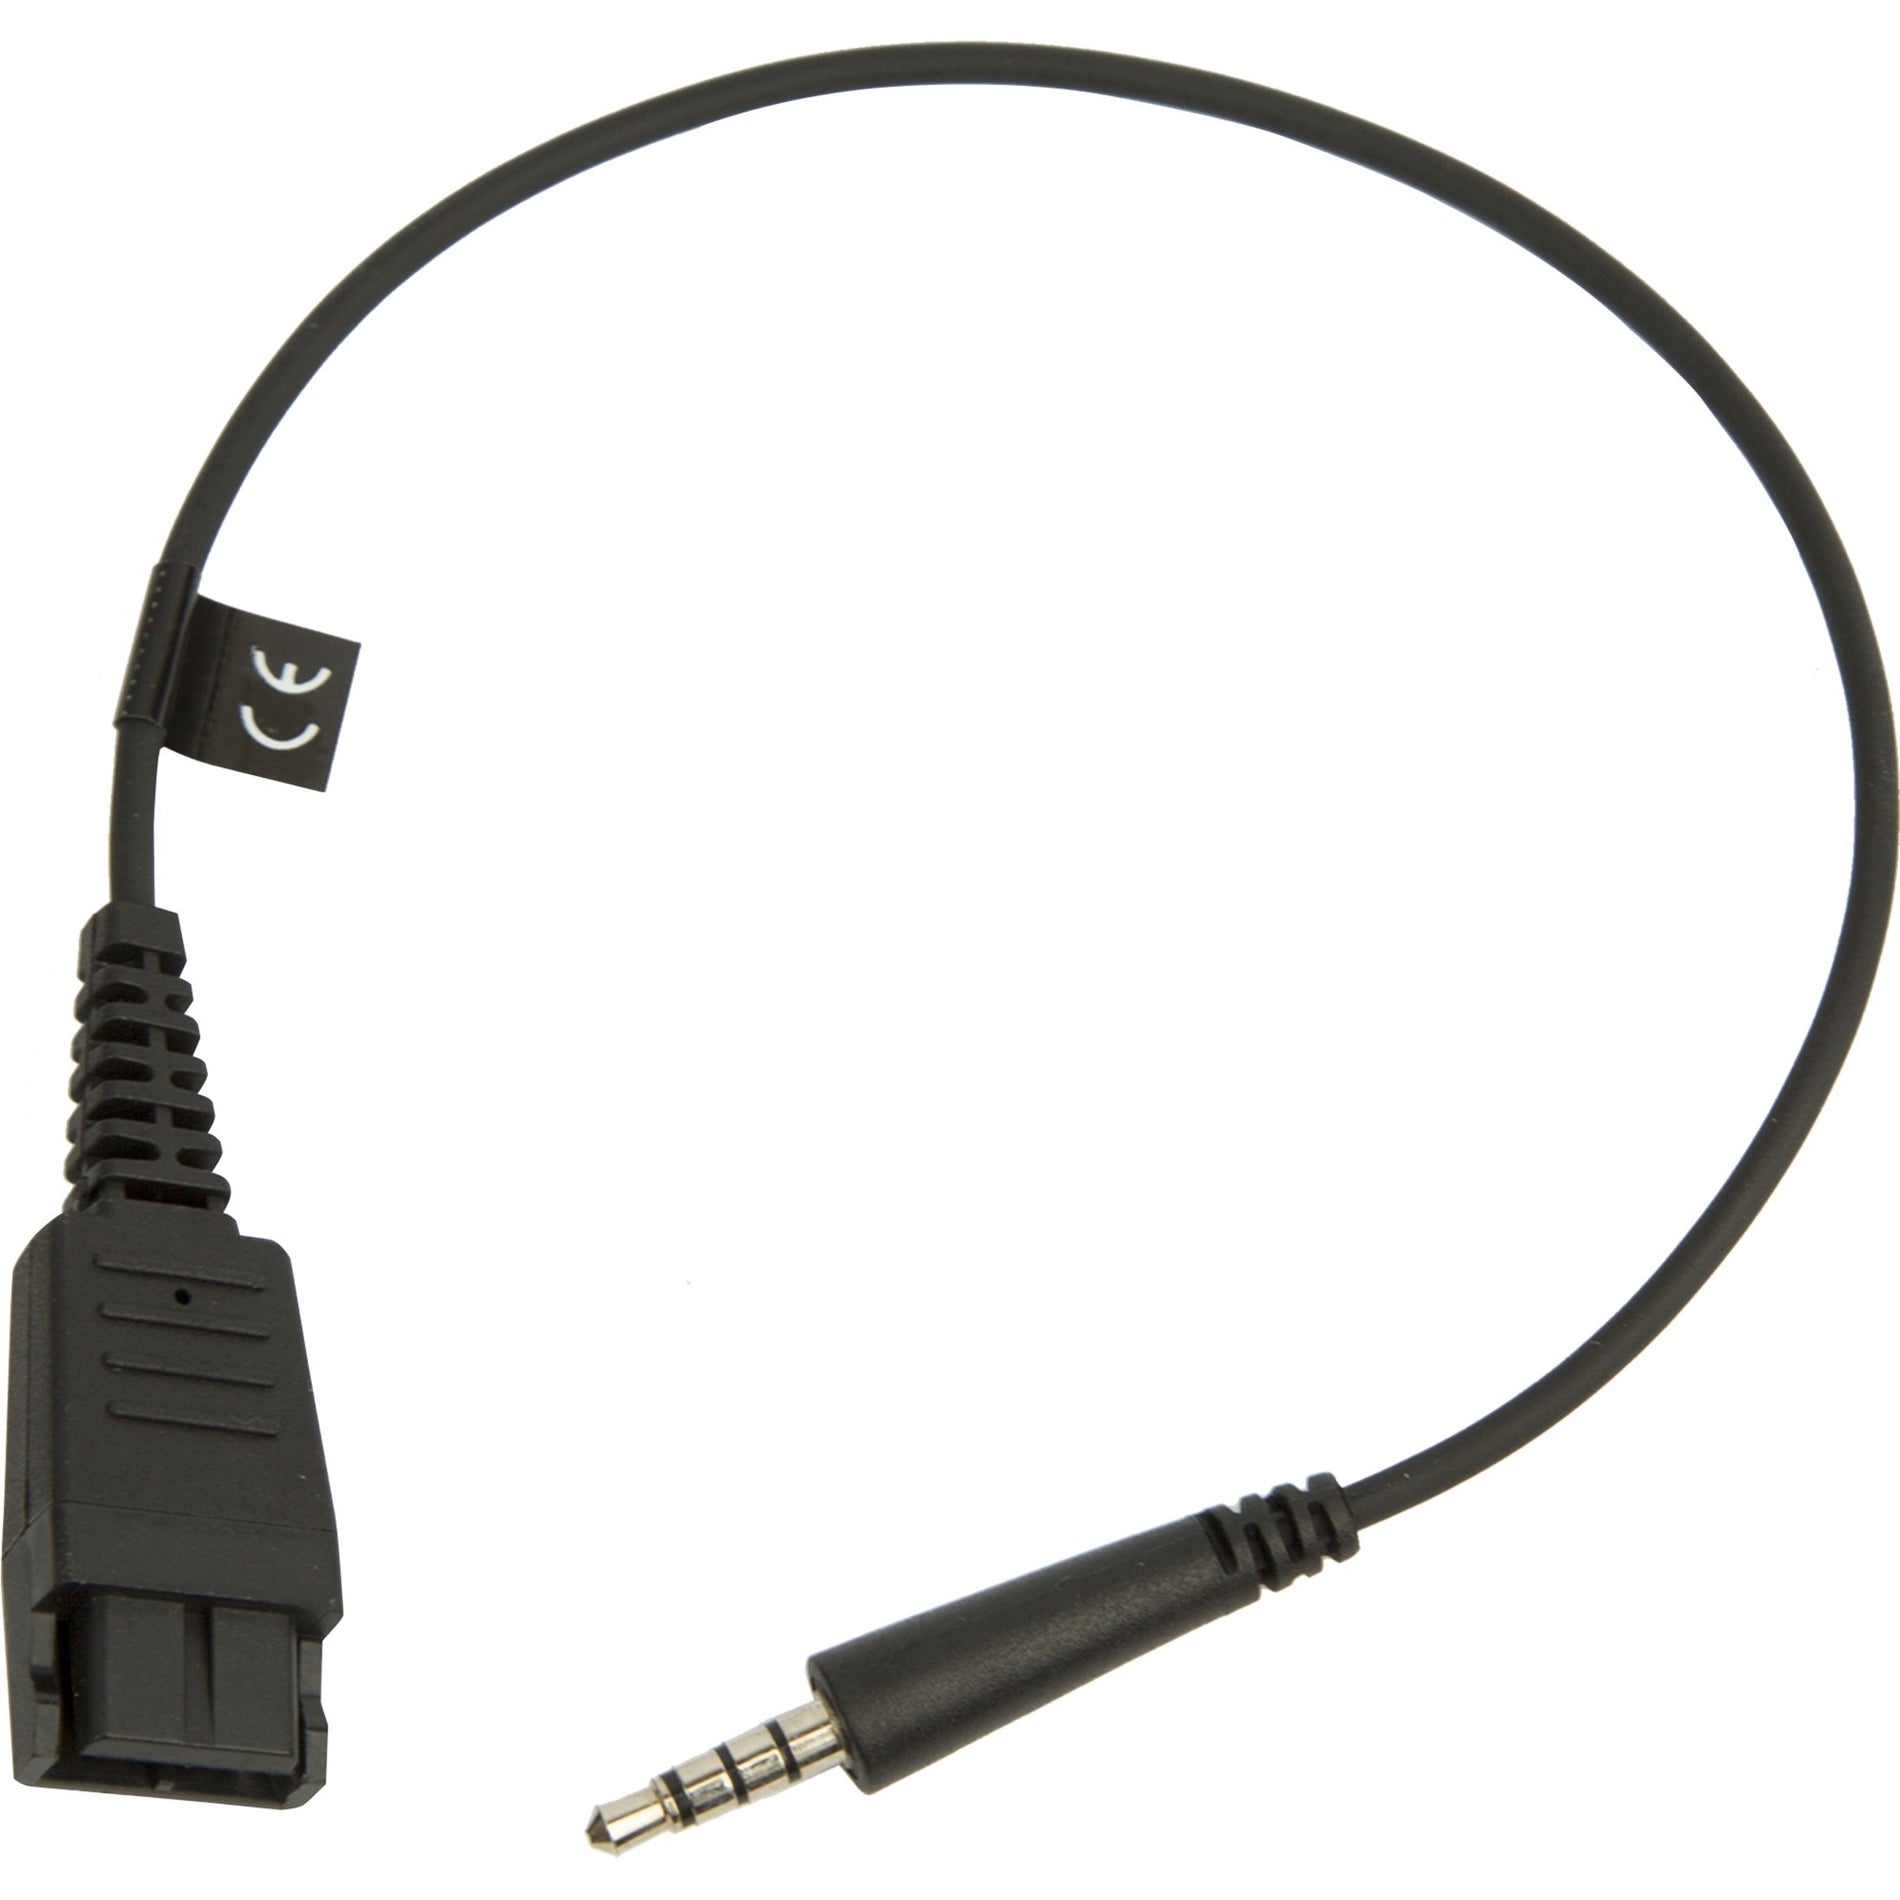 Jabra 8800-00-99 Audio Cable Adapter, Copper Conductor, Extension Cable, Black